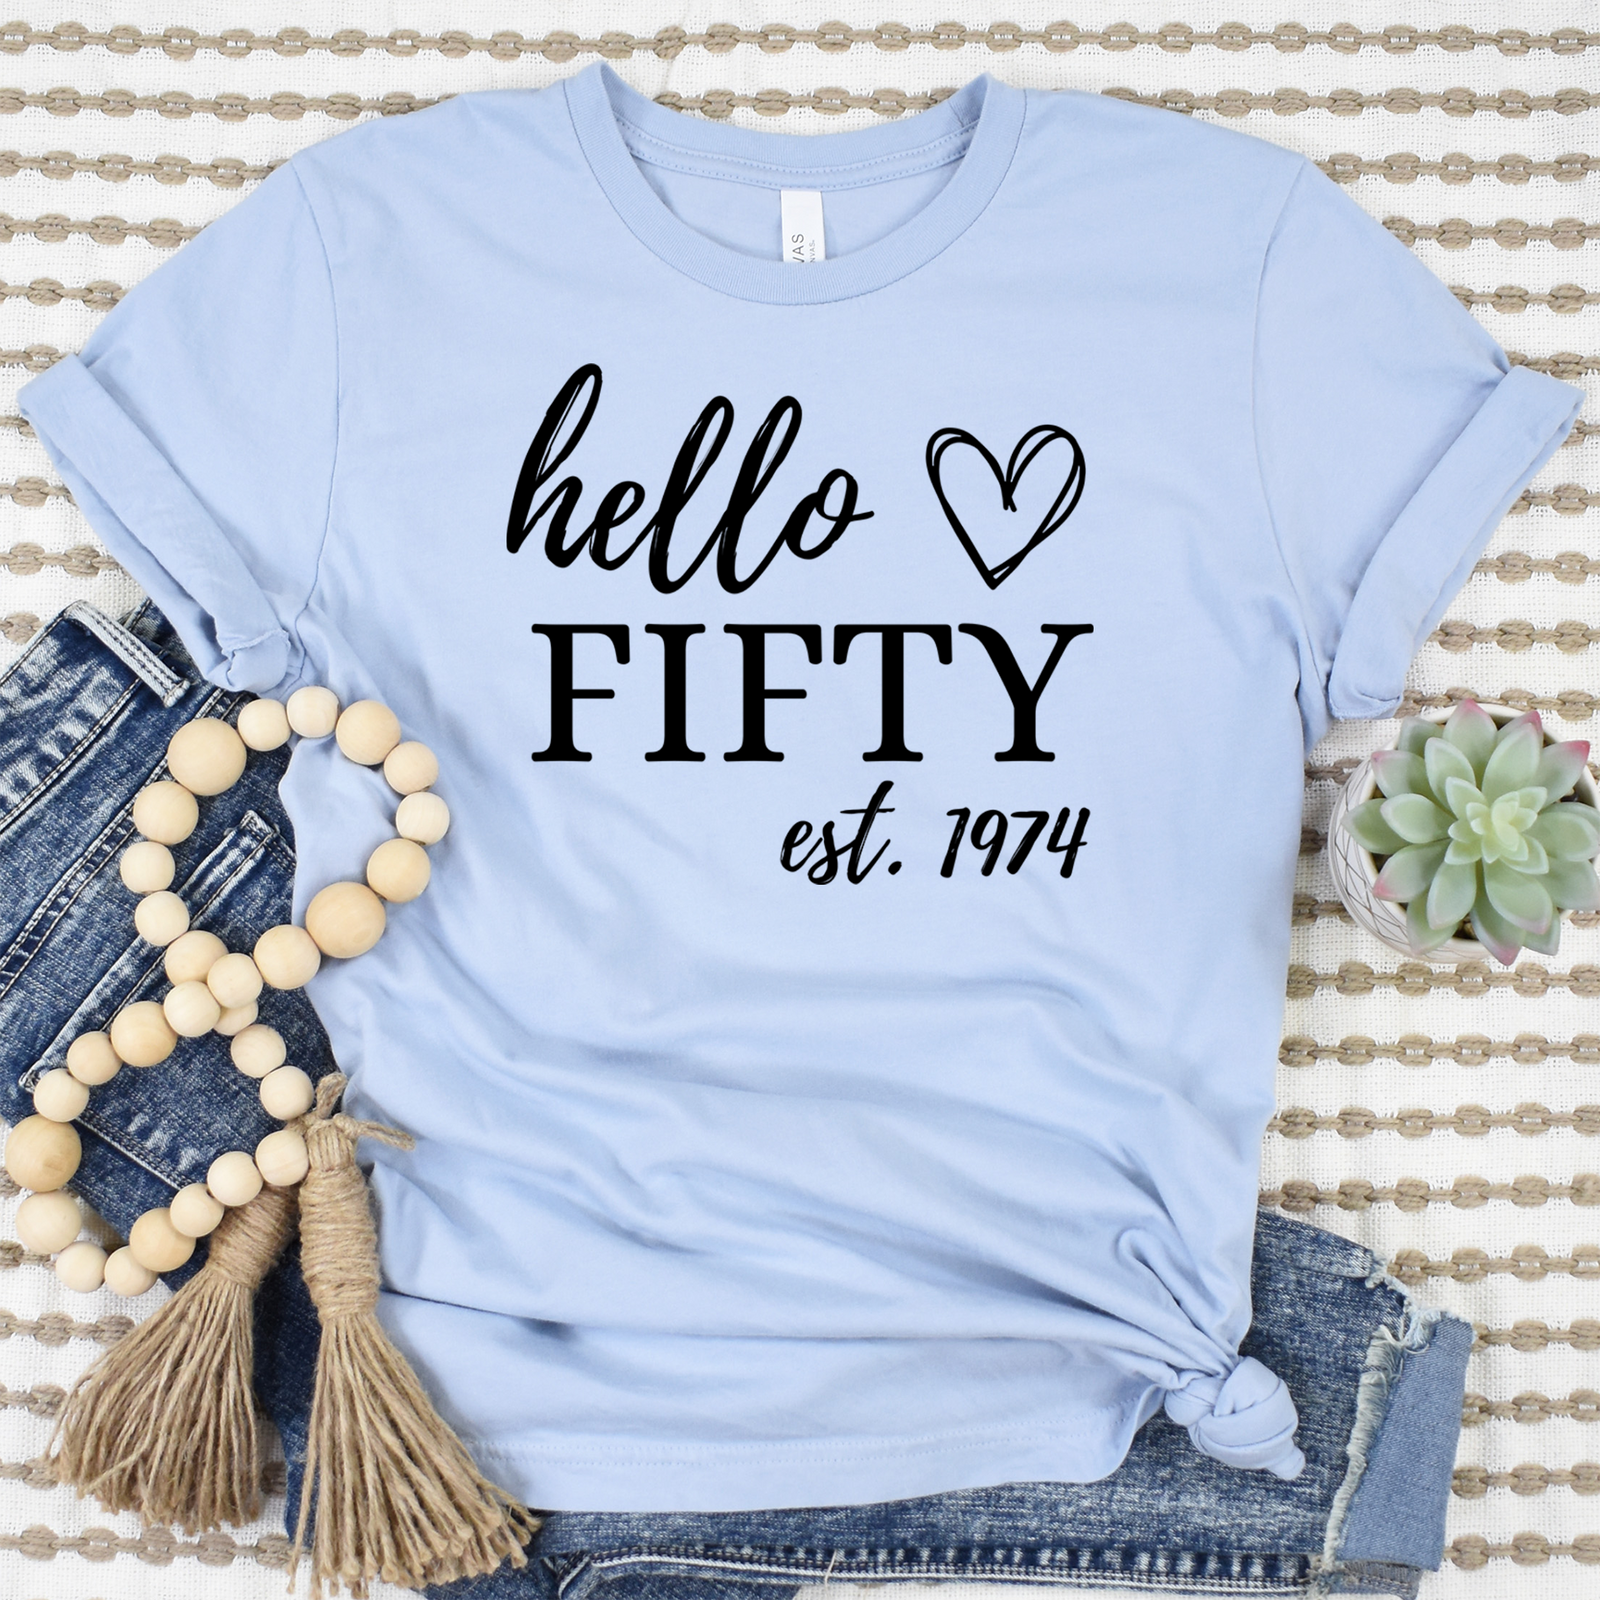 Womens Light Blue T Shirt with Hello-Fifty design